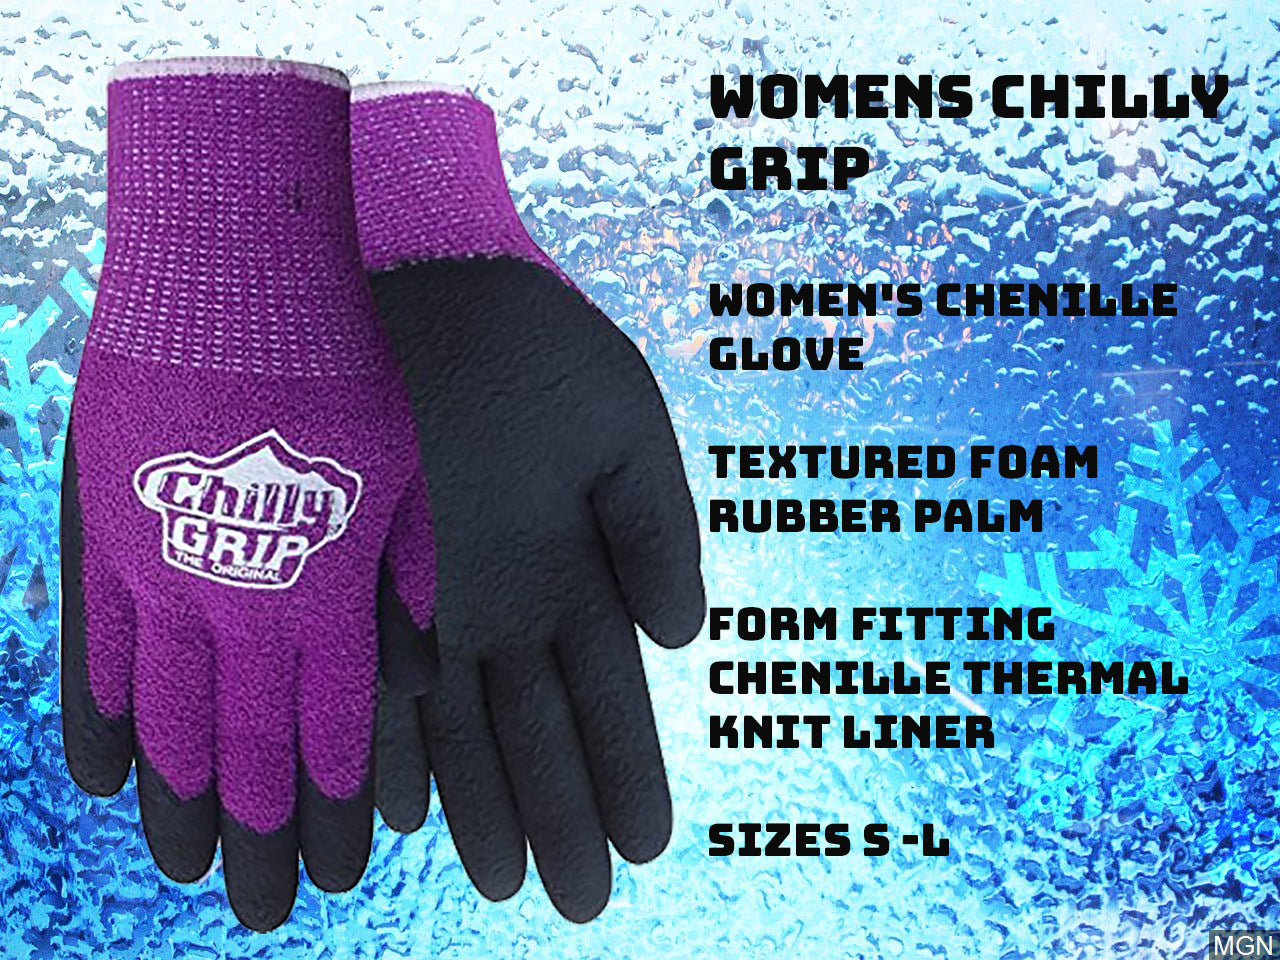 Kinco Women's Warm Grip Thermal Lined Gloves, Gray, L